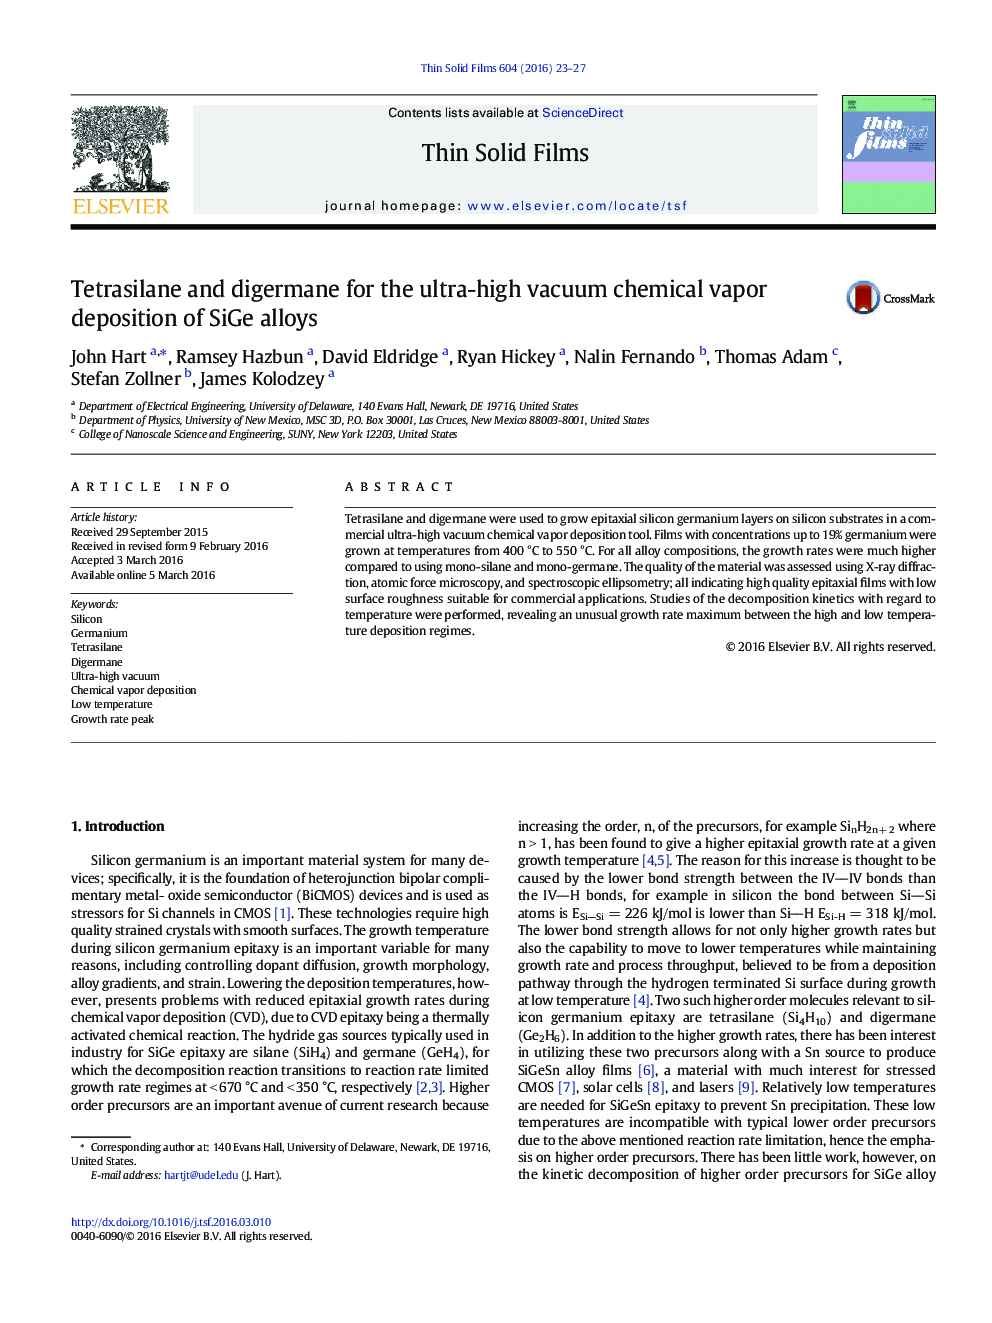 Tetrasilane and digermane for the ultra-high vacuum chemical vapor deposition of SiGe alloys